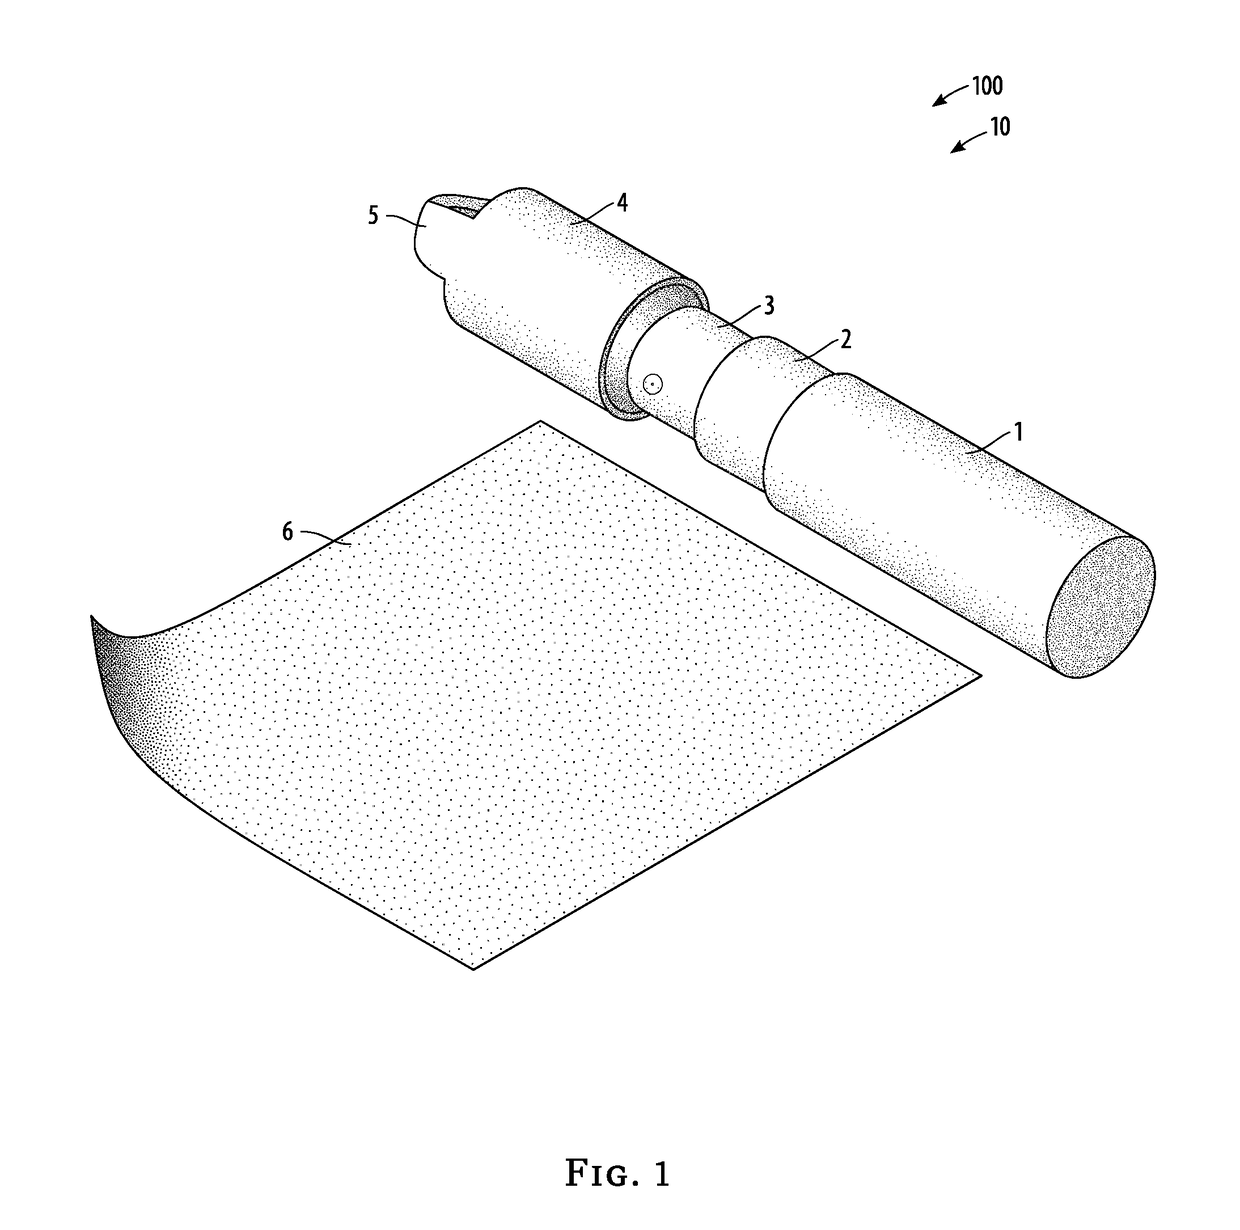 Electronic-device sanitizer product and method